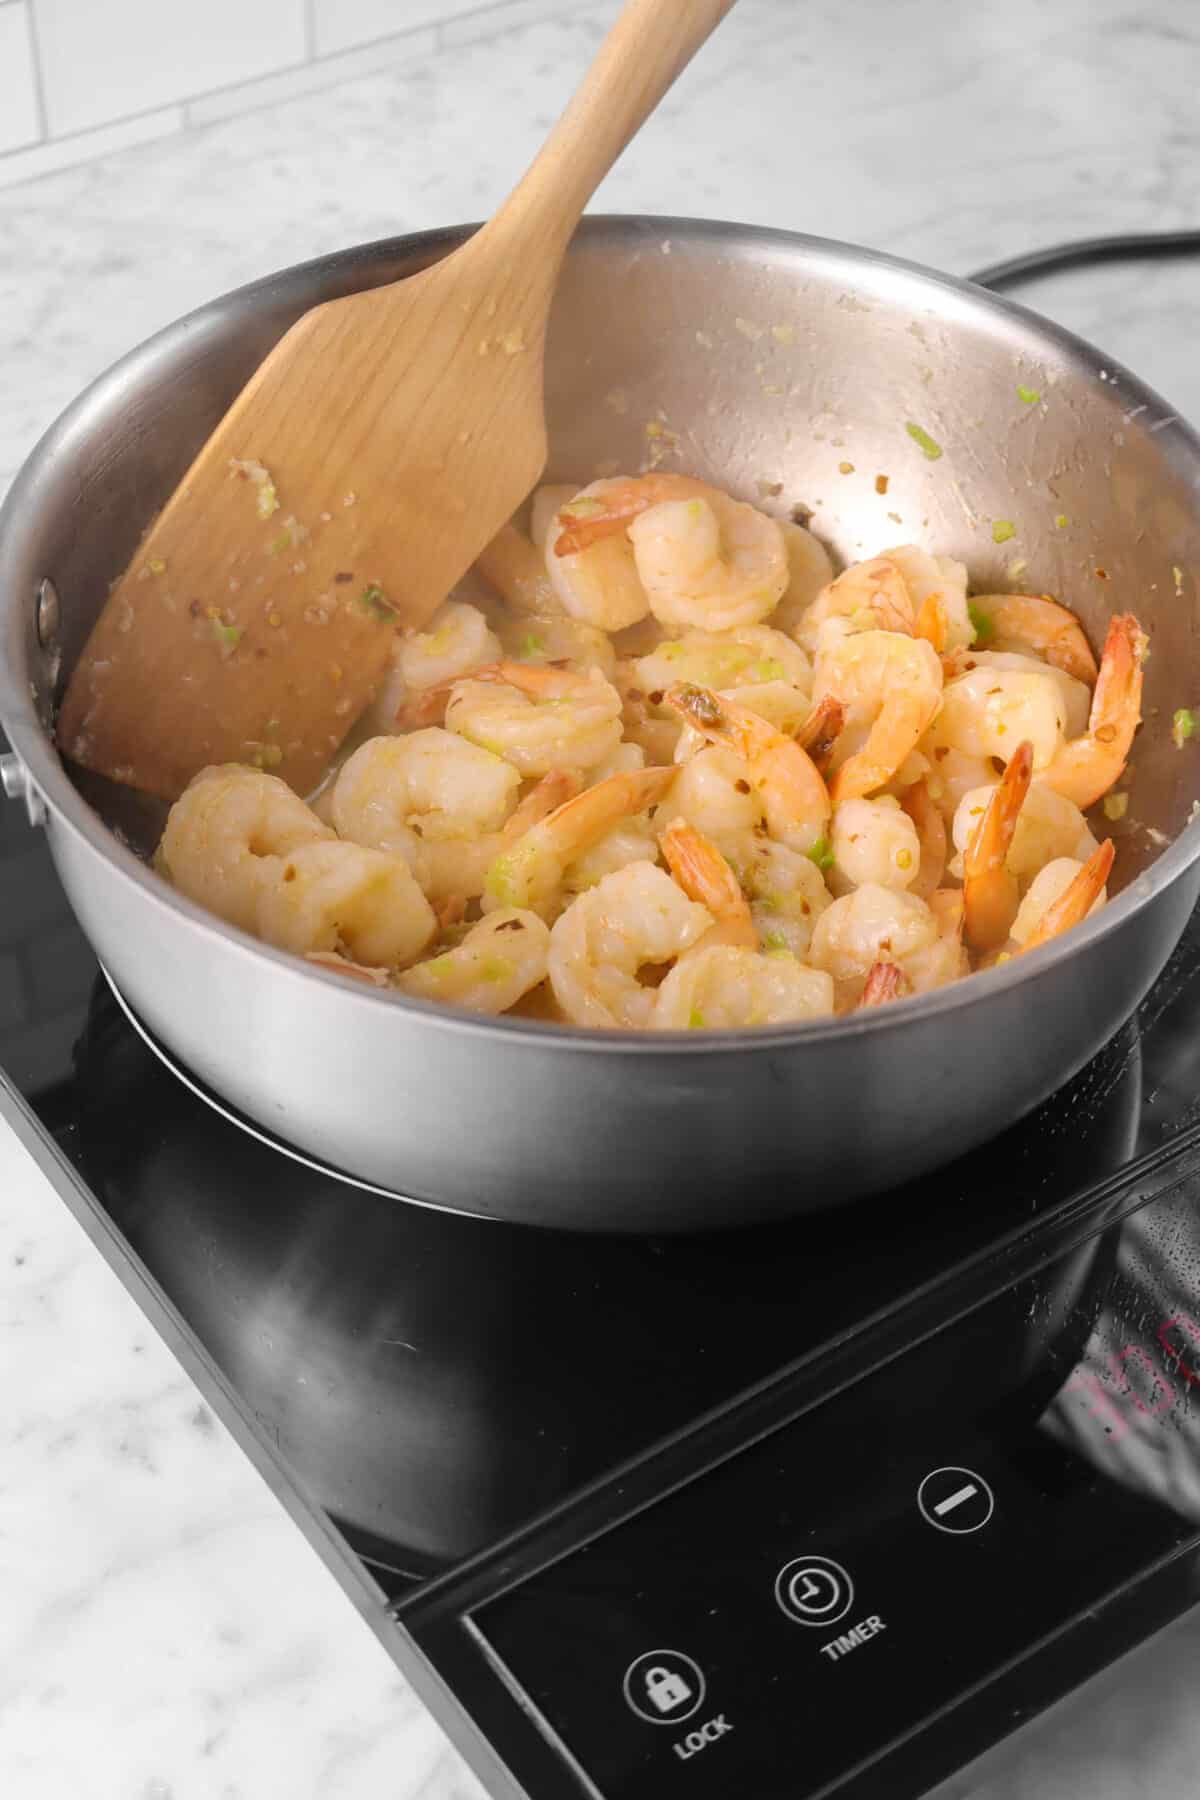 shrimps sautéed in butter mixture with wood spoon